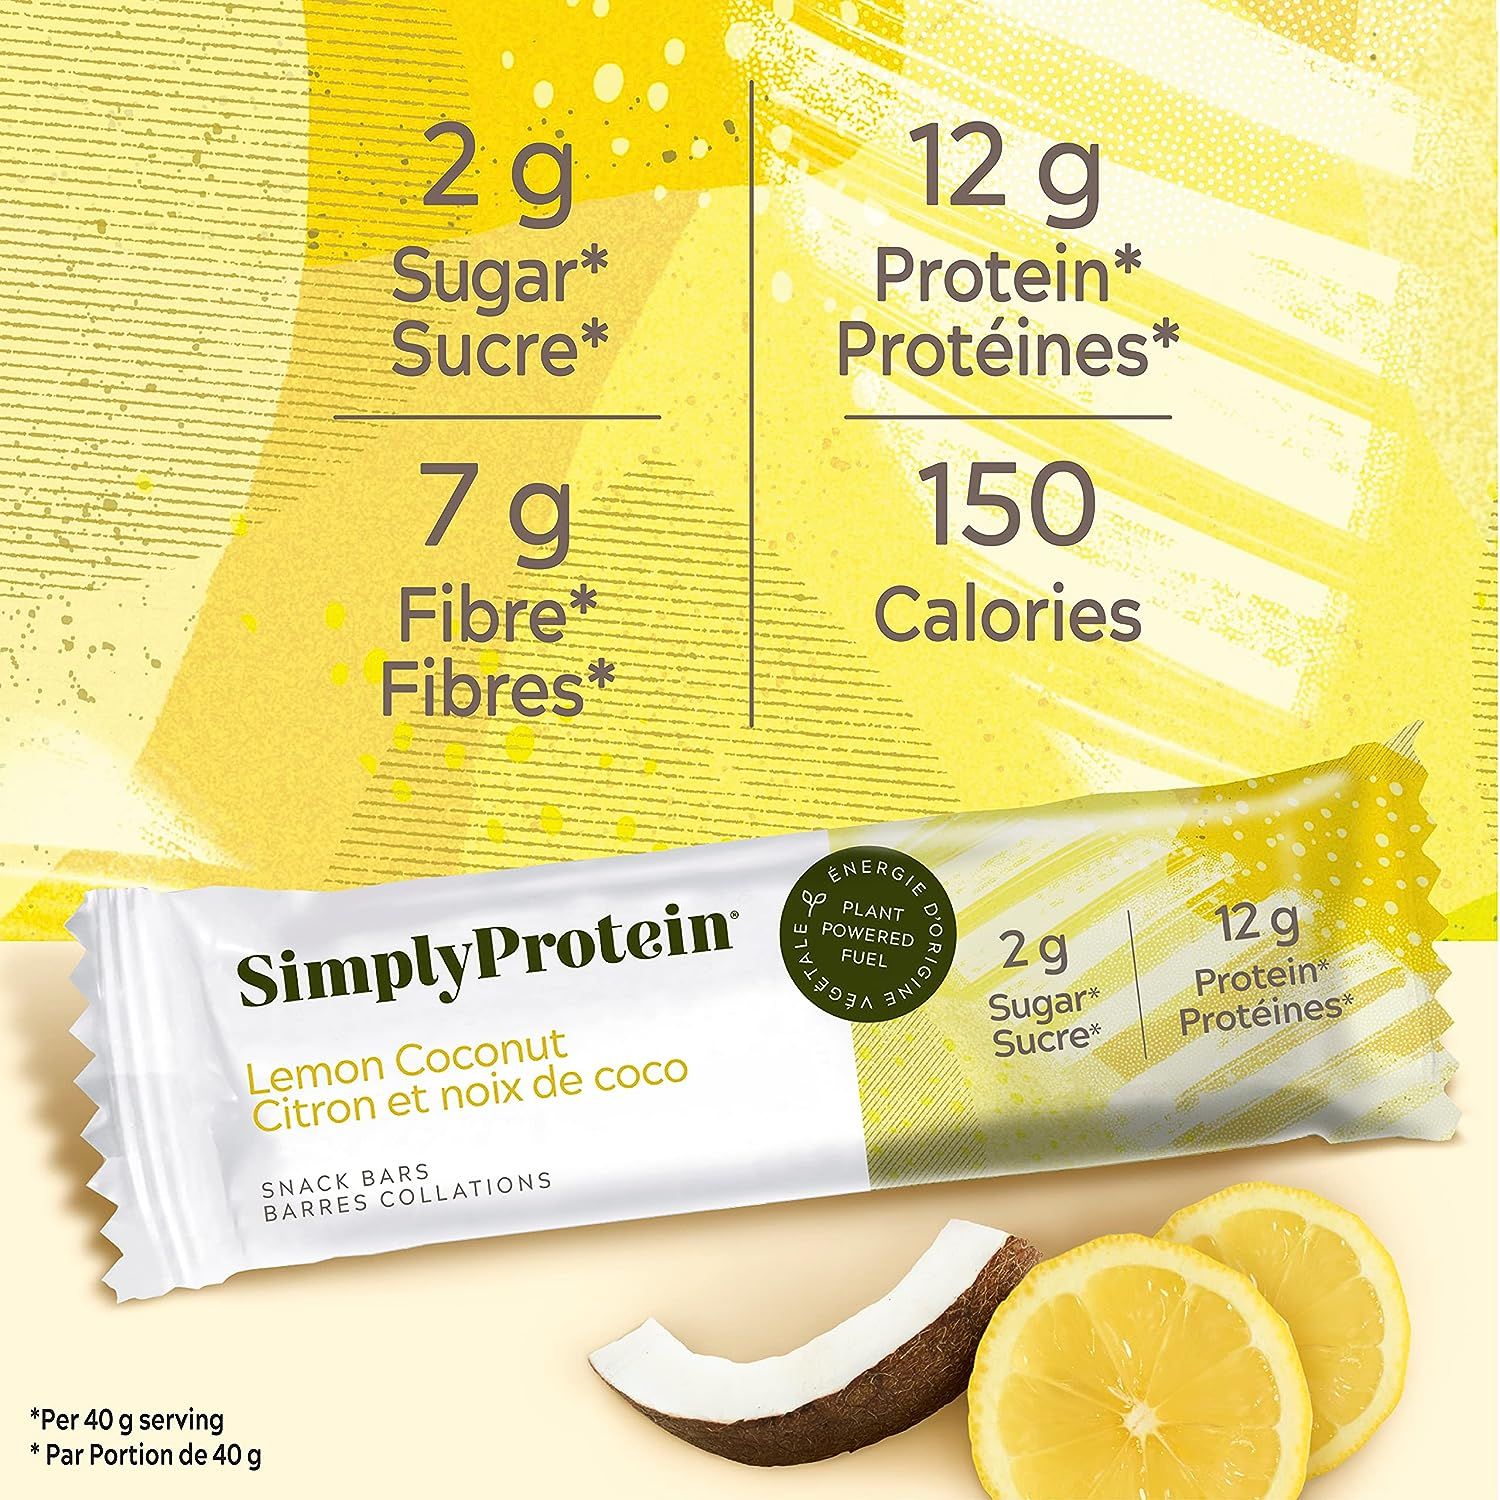 SimplyProtein Protein Snack Bar (1 bar) Protein Snacks Lemon Coconut SimplyProtein